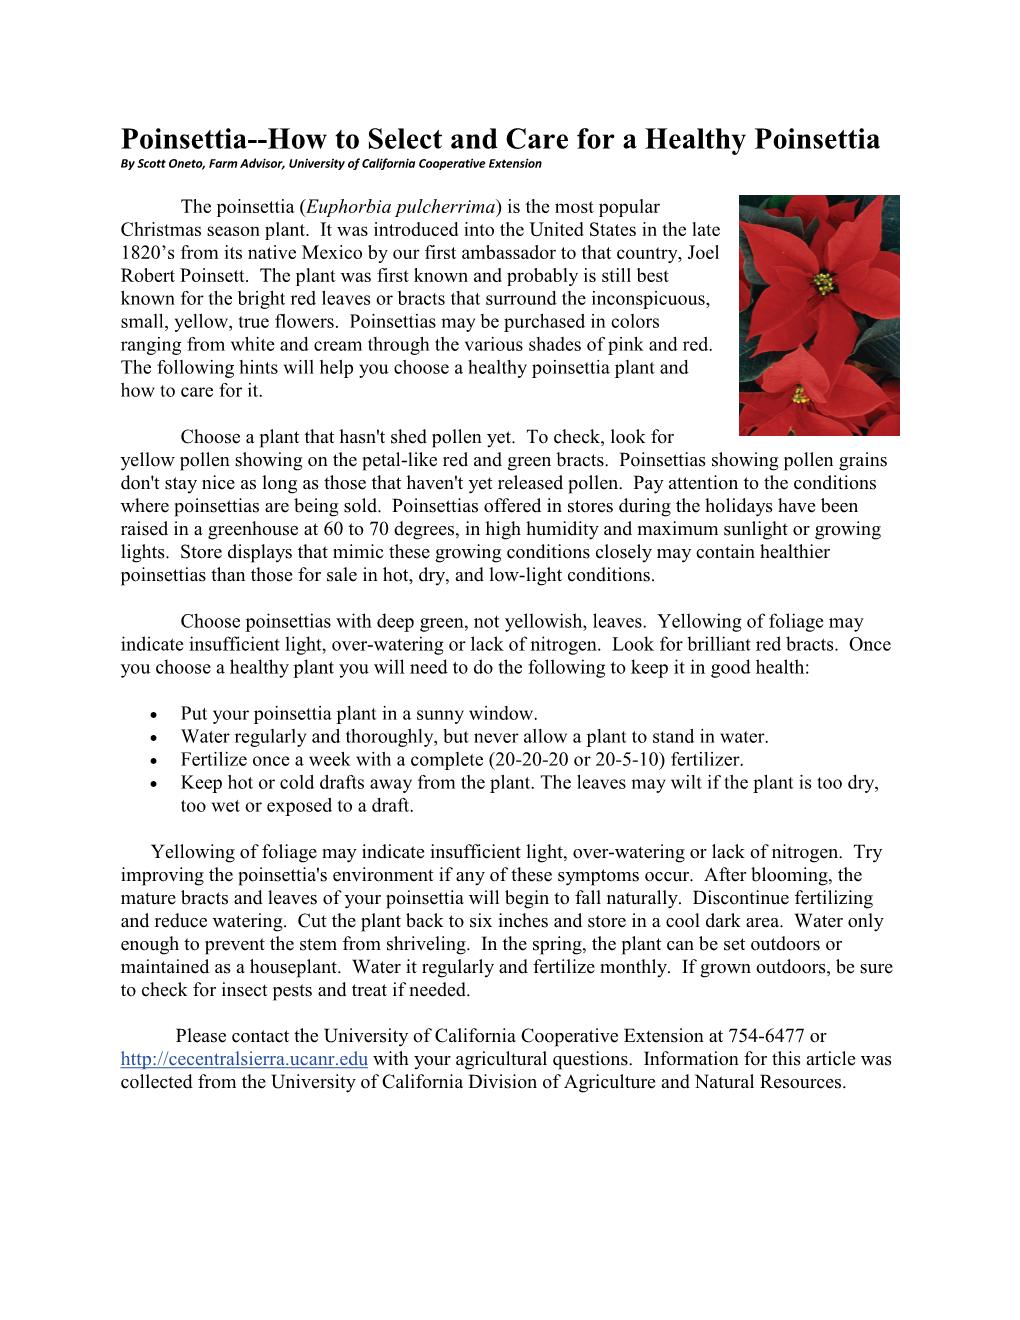 Poinsettia--How to Select and Care for a Healthy Poinsettia by Scott Oneto, Farm Advisor, University of California Cooperative Extension